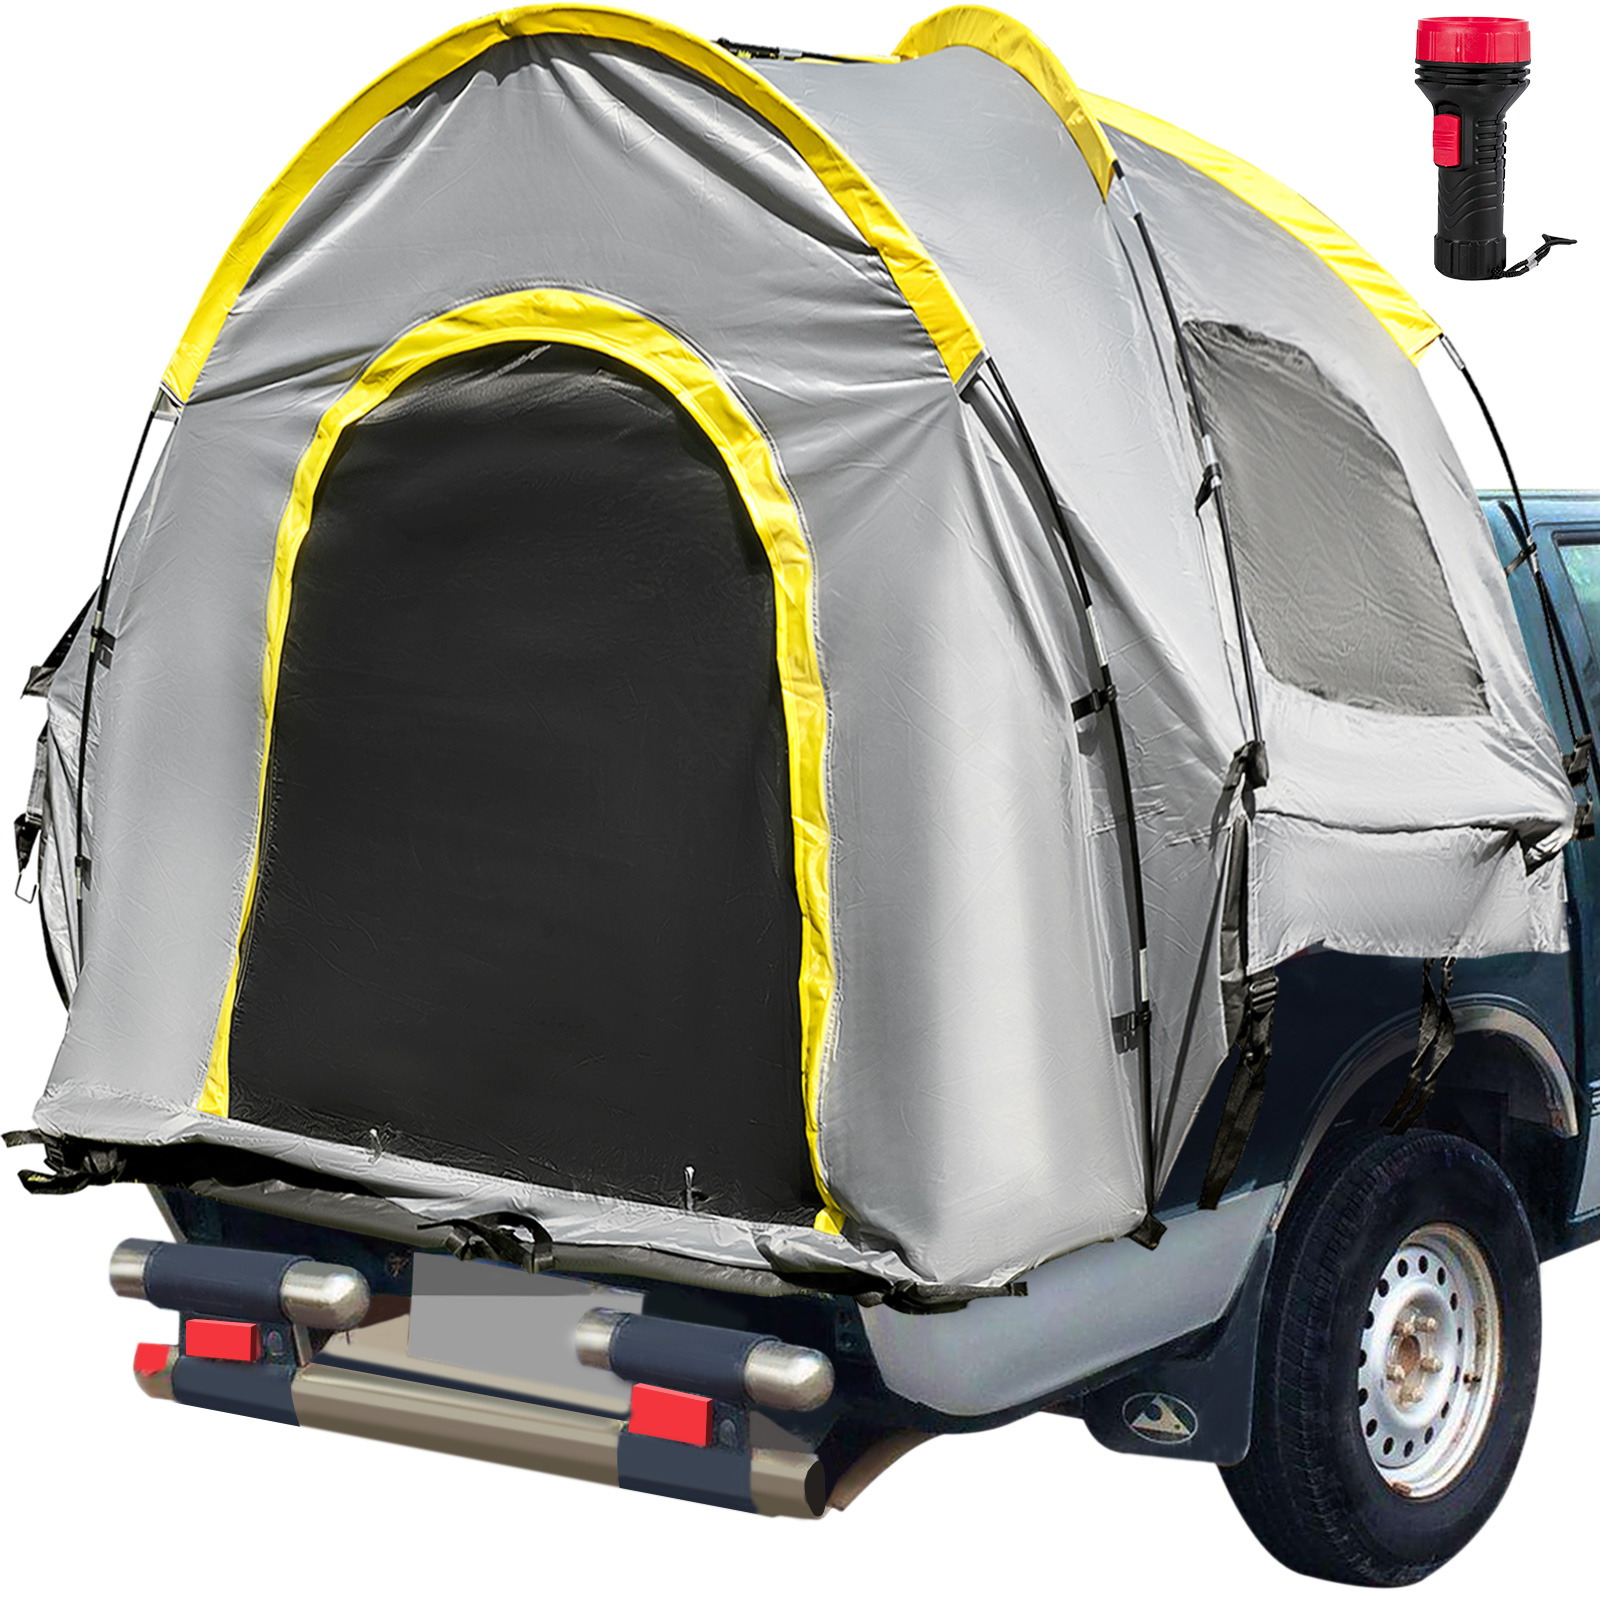 VEVOR Truck Tent Truck Bed Tent Standard 6.5ft Pickup Tent Waterproof for Truck от Vevor Many GEOs